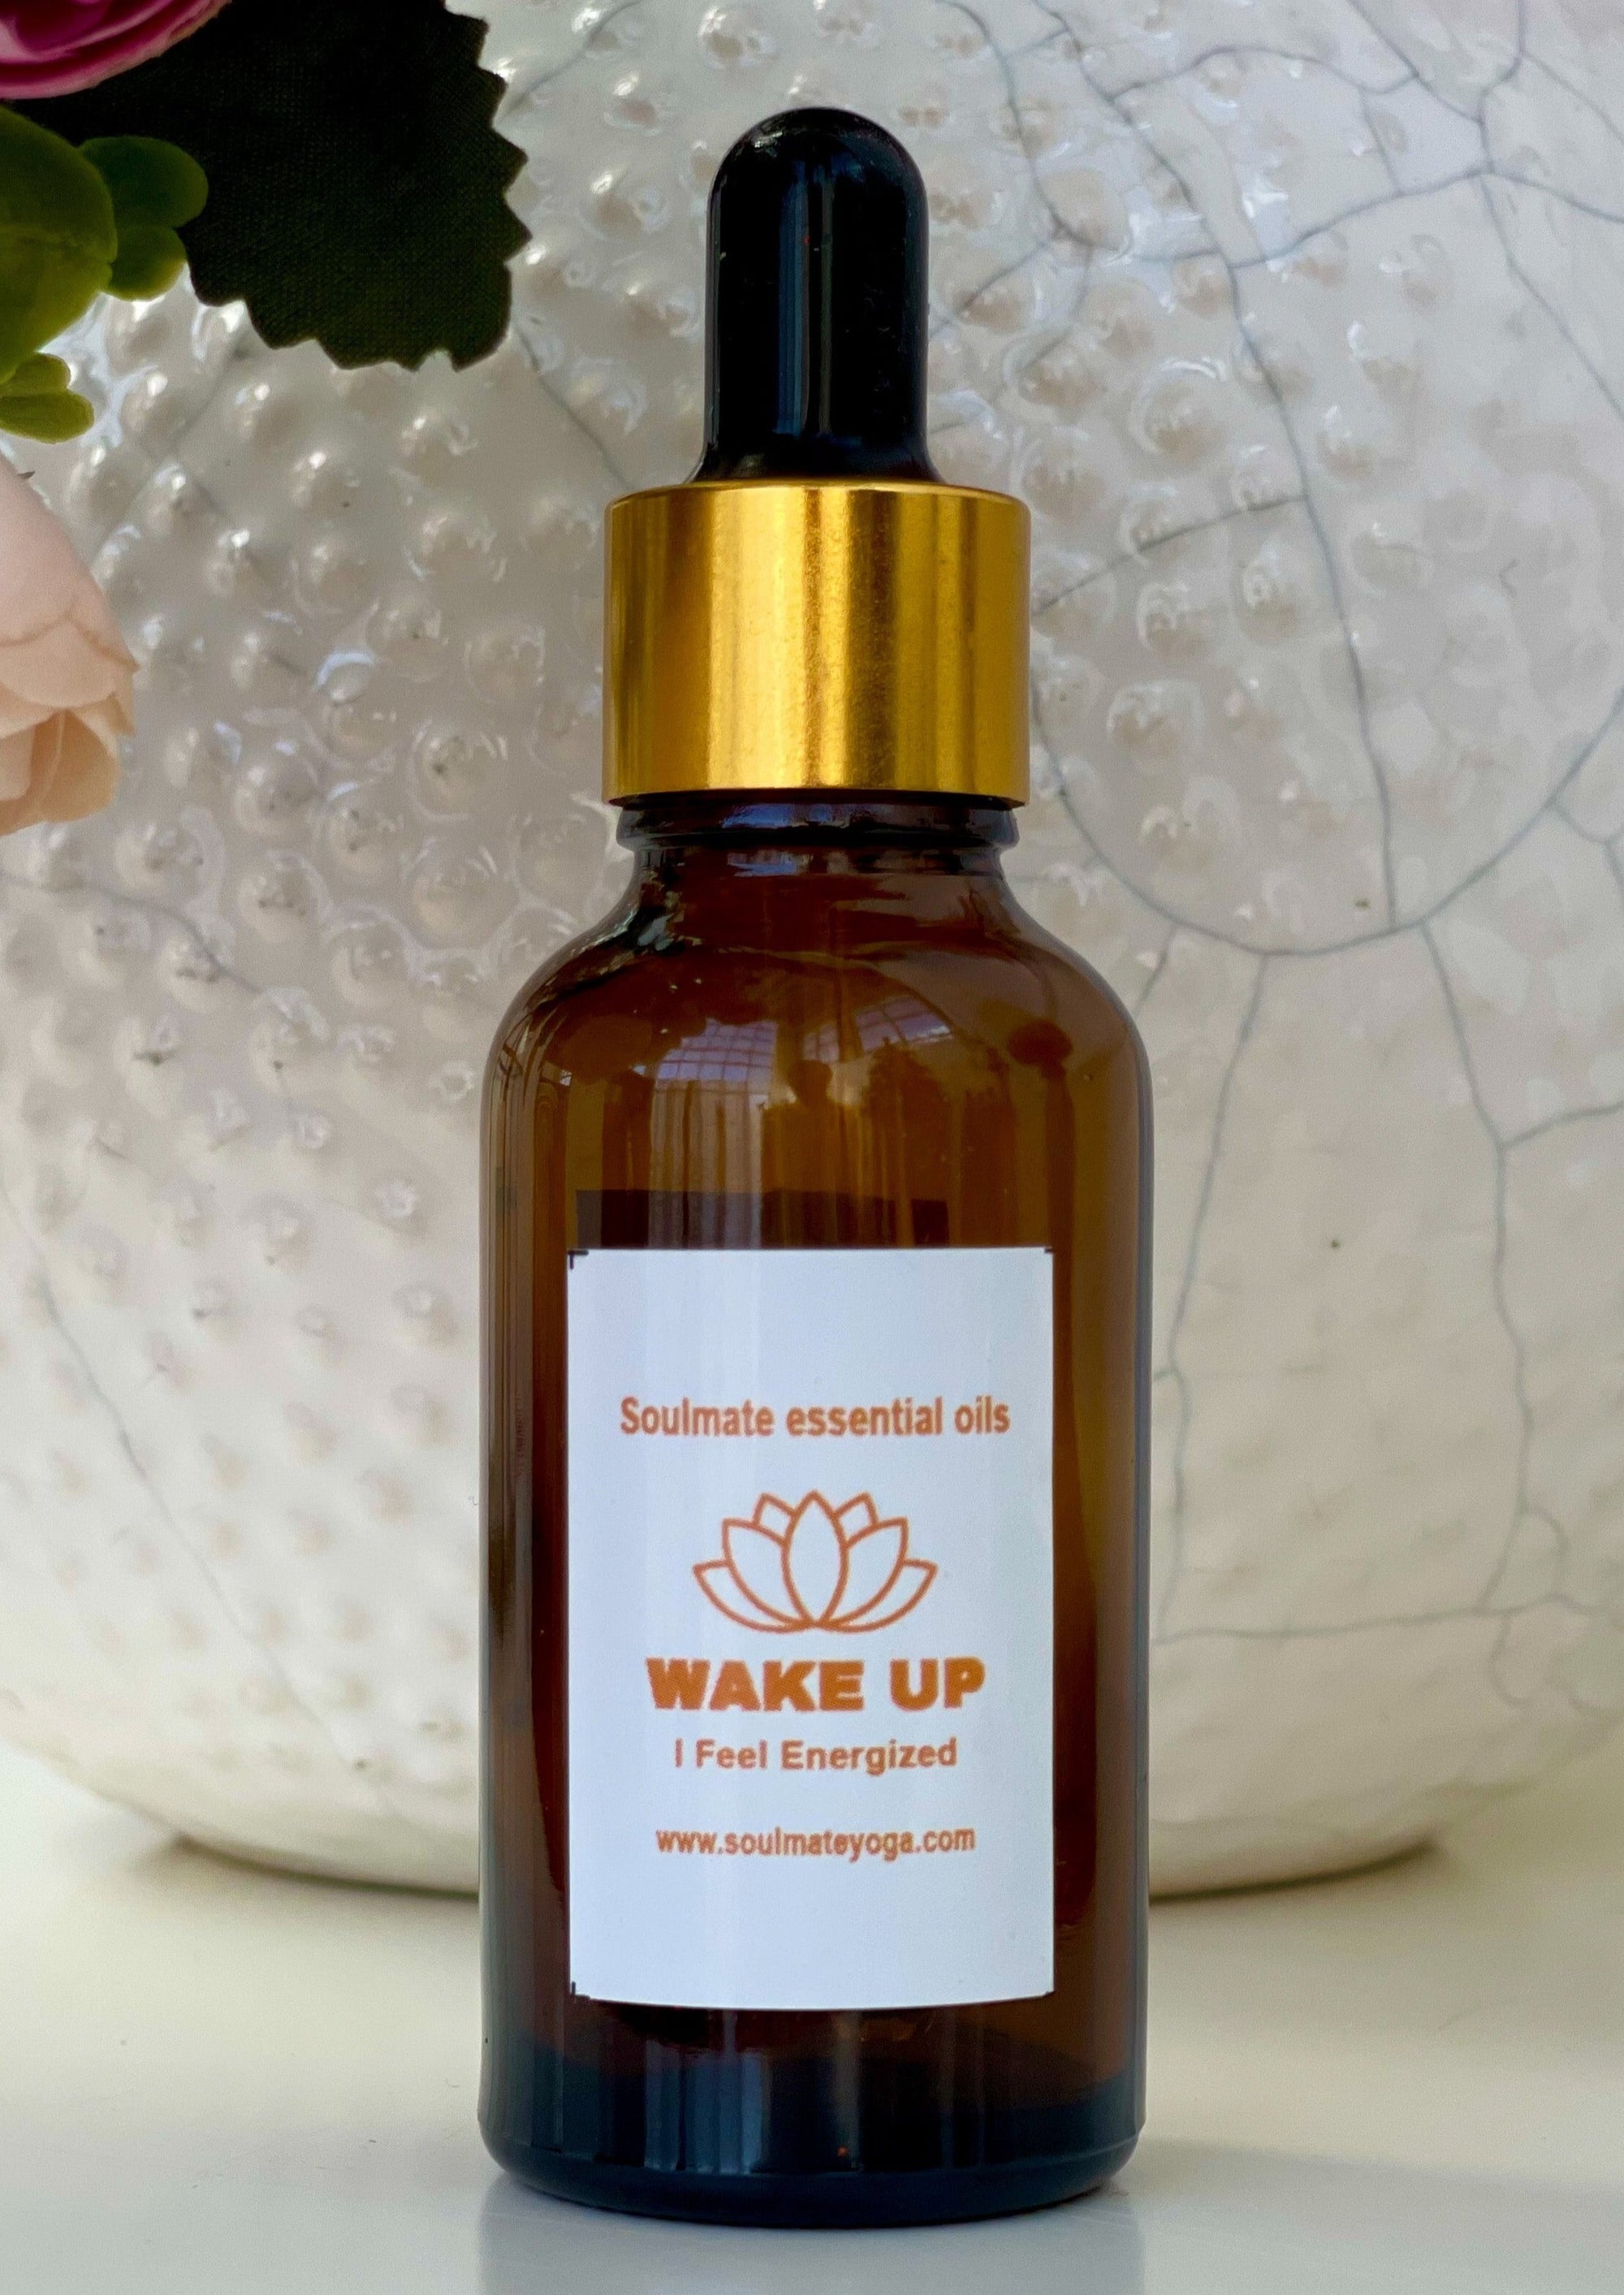 "WAKE UP" Essential Oil Blend